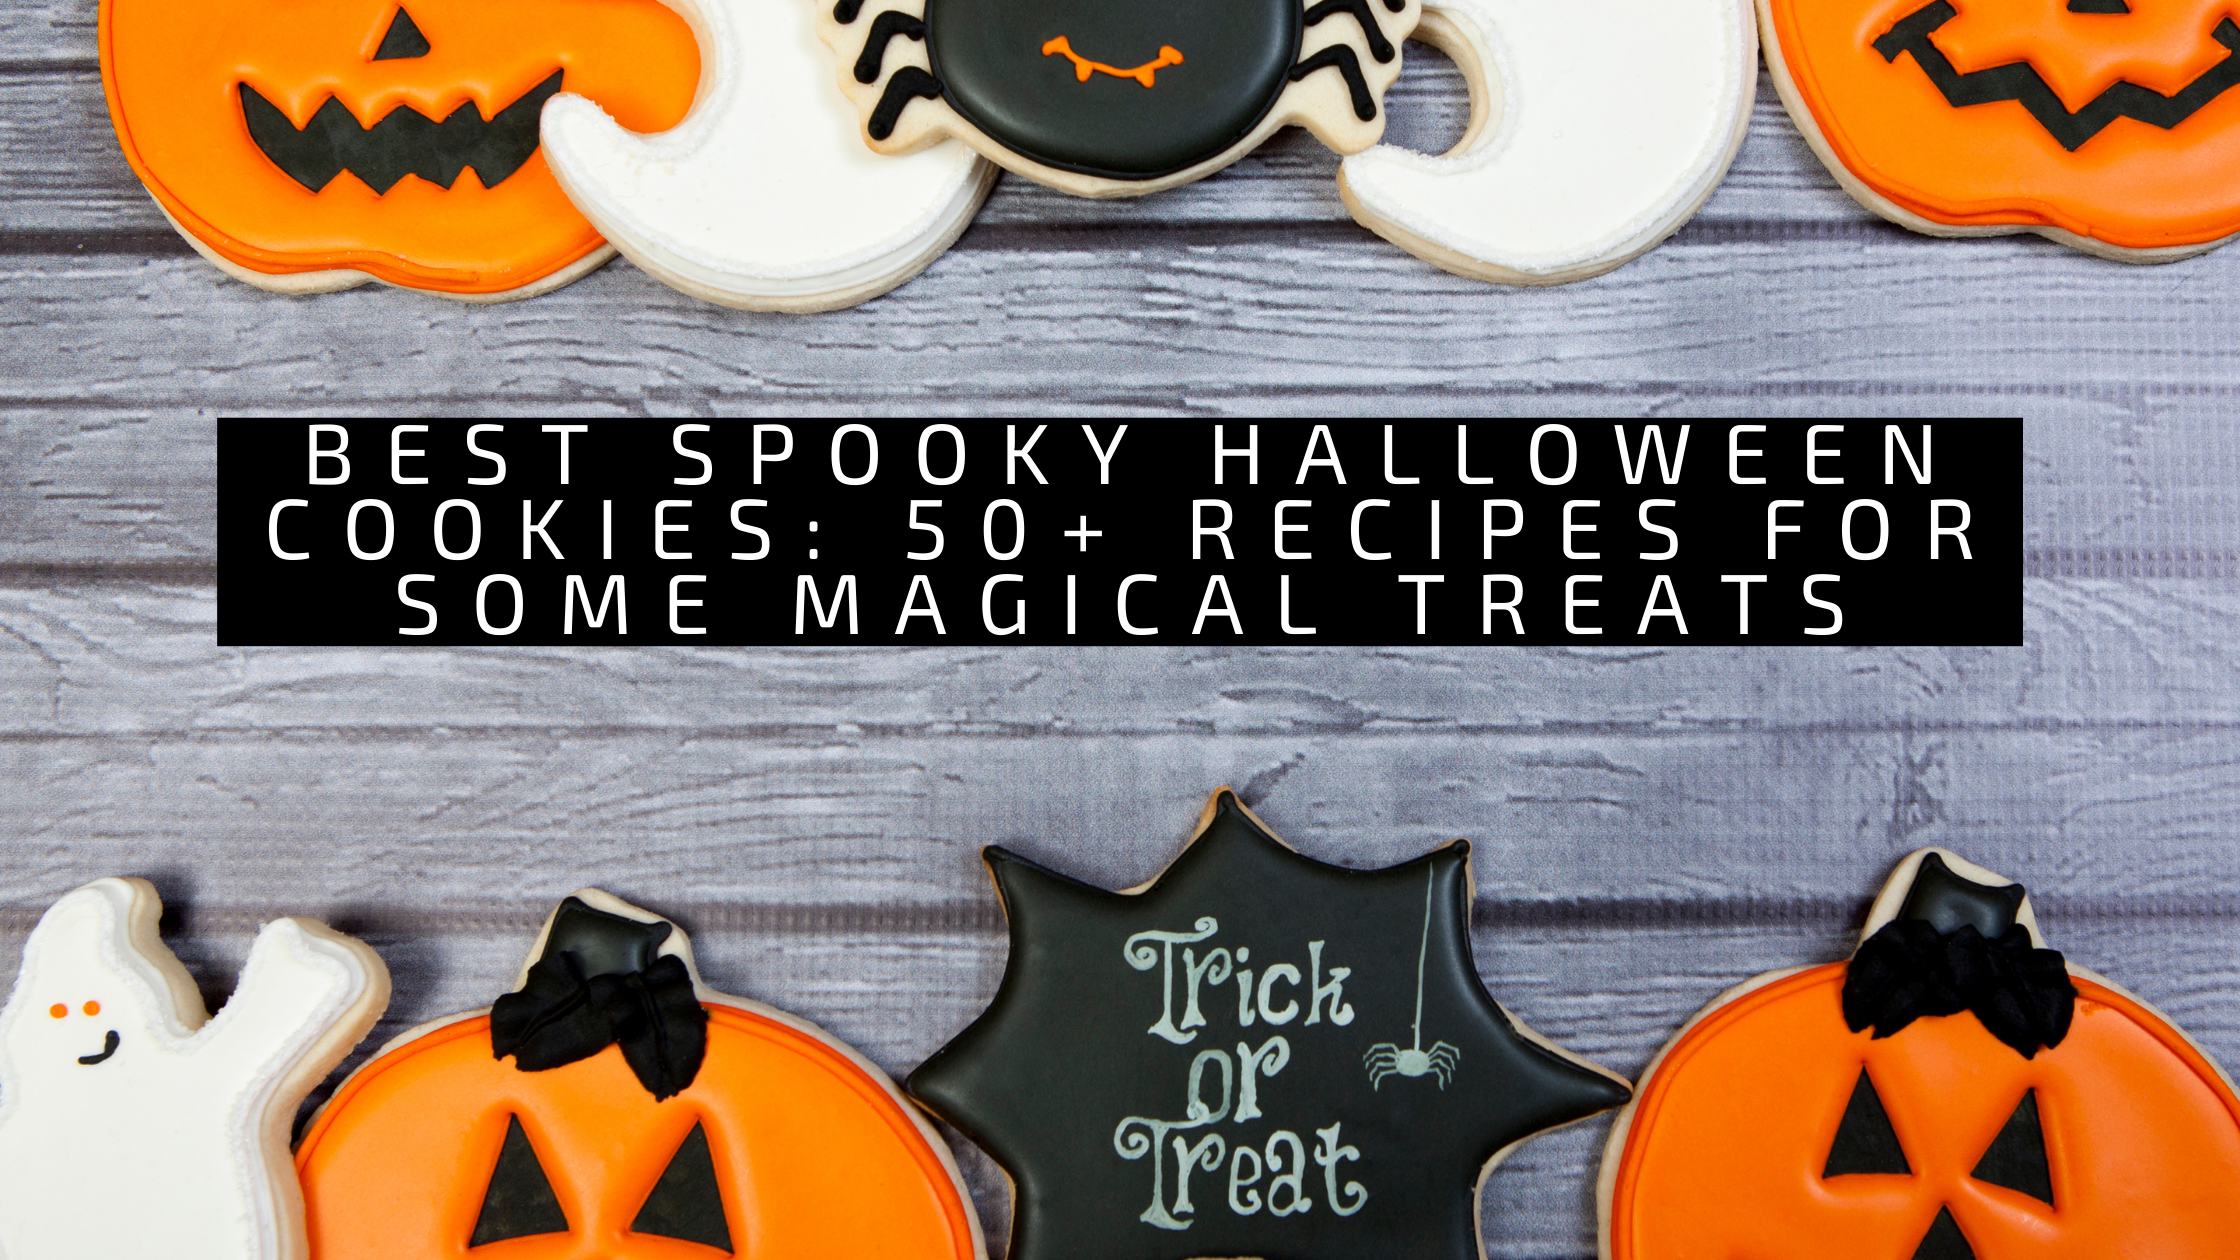 Best Spooky Halloween Cookies: 50+ Recipes for Some Magical Treats 24